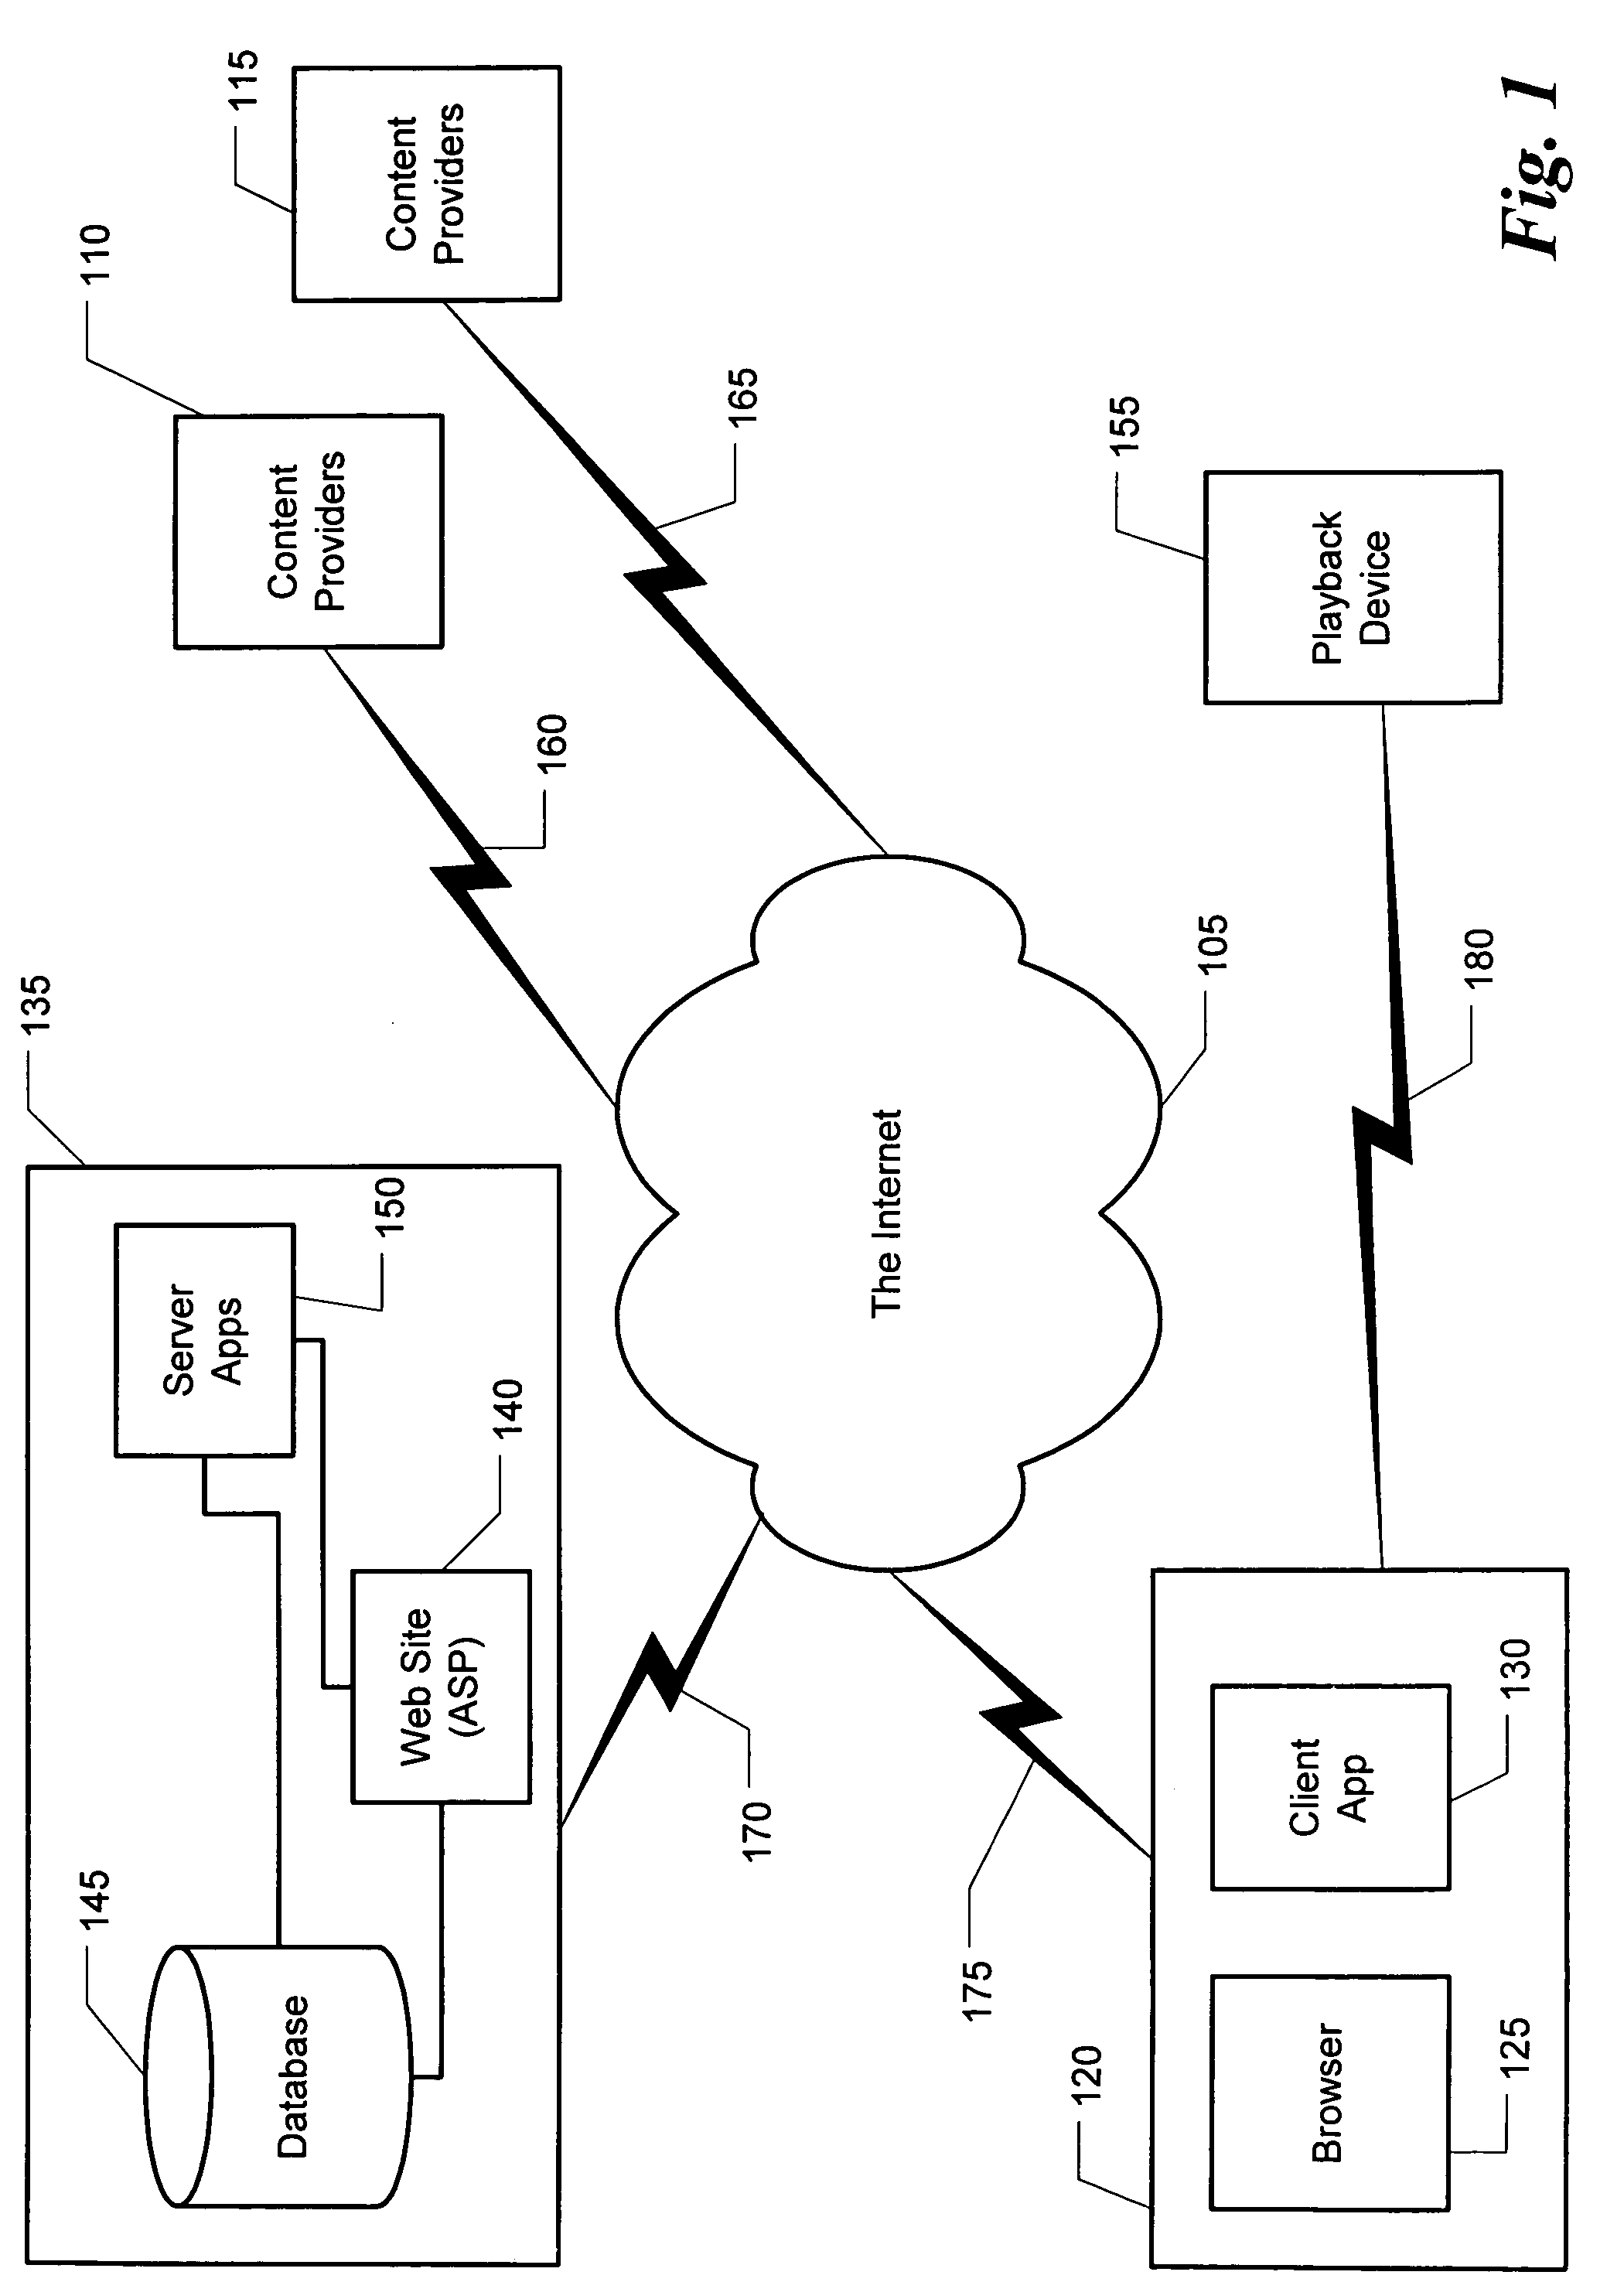 System for and method of implementing a closed loop response architecture for electronic commerce